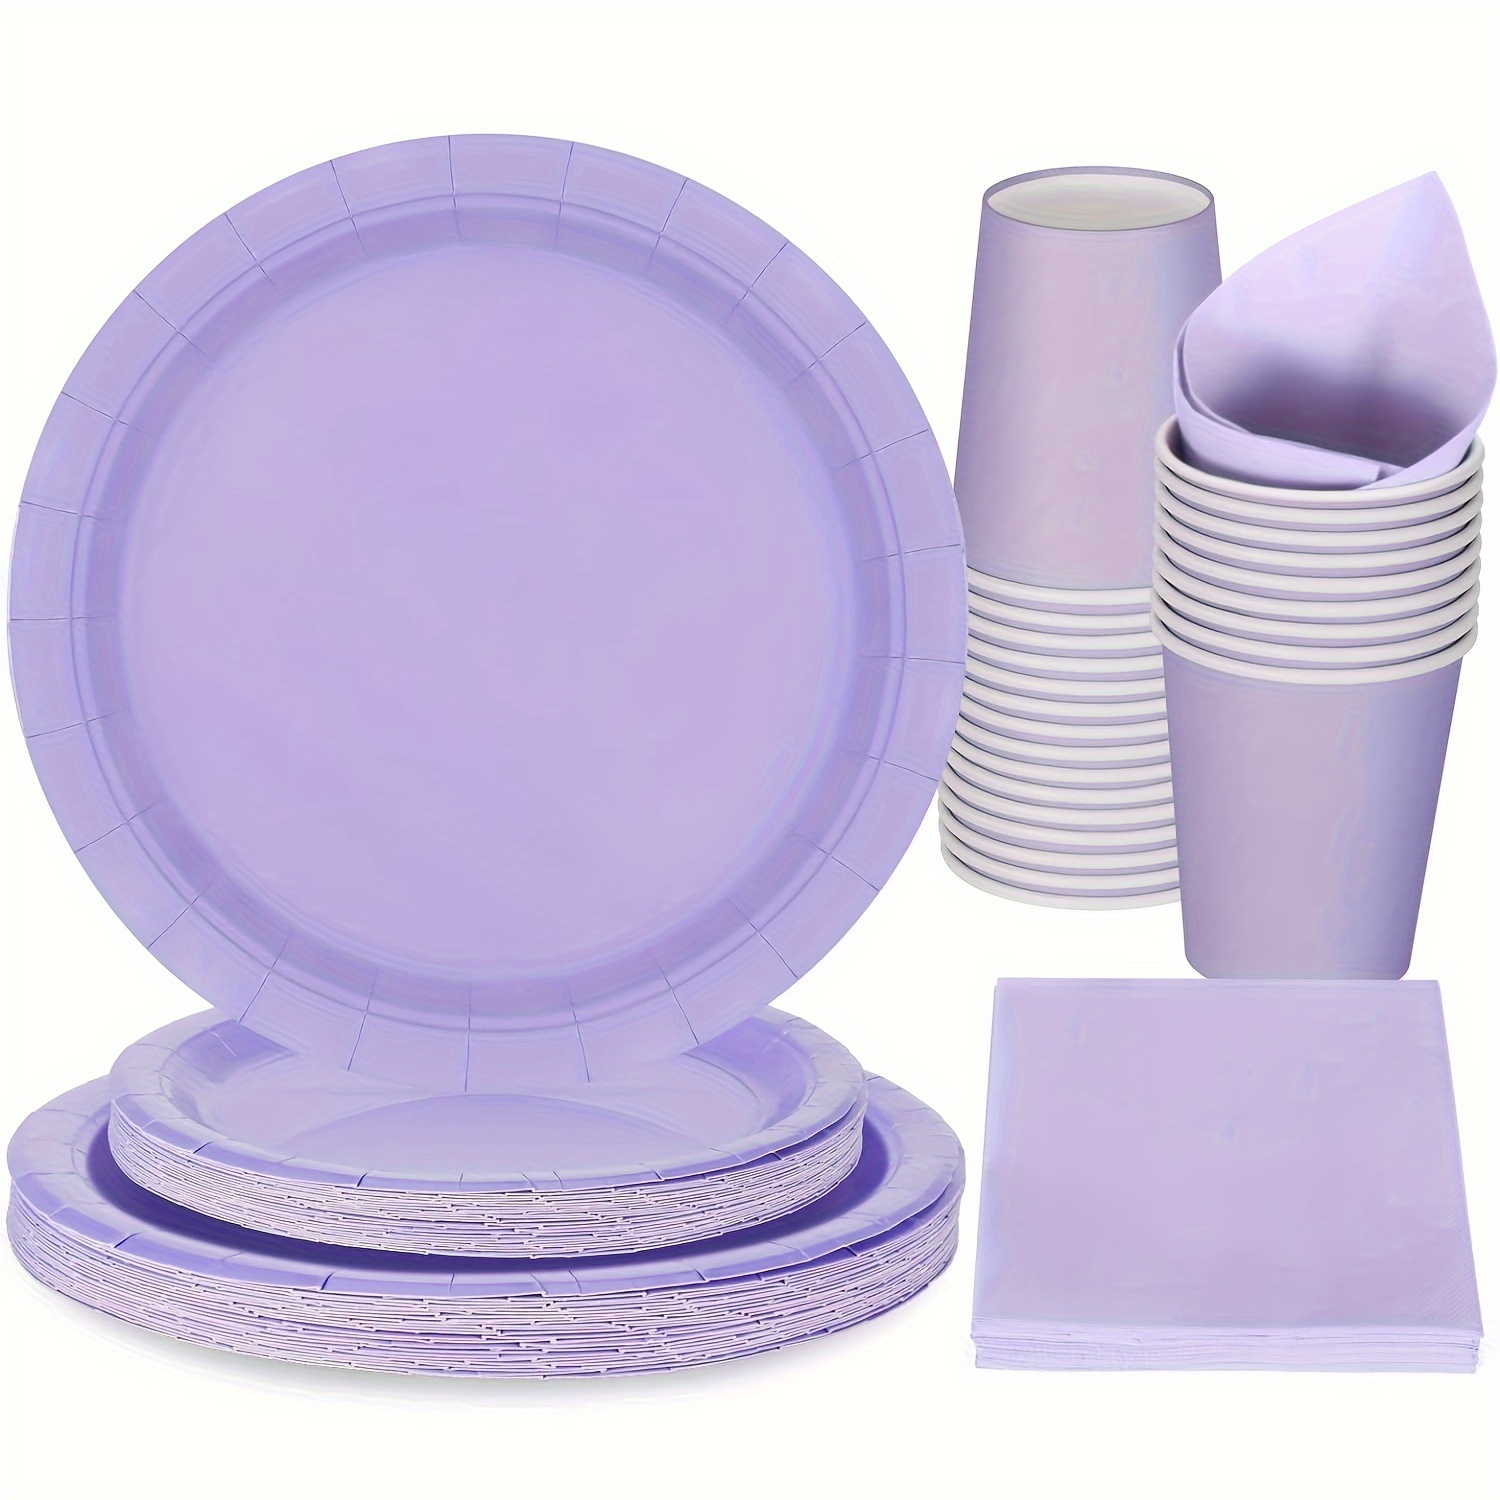 

Elegant Purple 68-piece Tableware Set - Disposable Plates, Cups & Napkins For Parties, Weddings, Birthdays - Serves 16 Guests Party Plates And Cups And Napkins Sets Tablecloths Round Tables